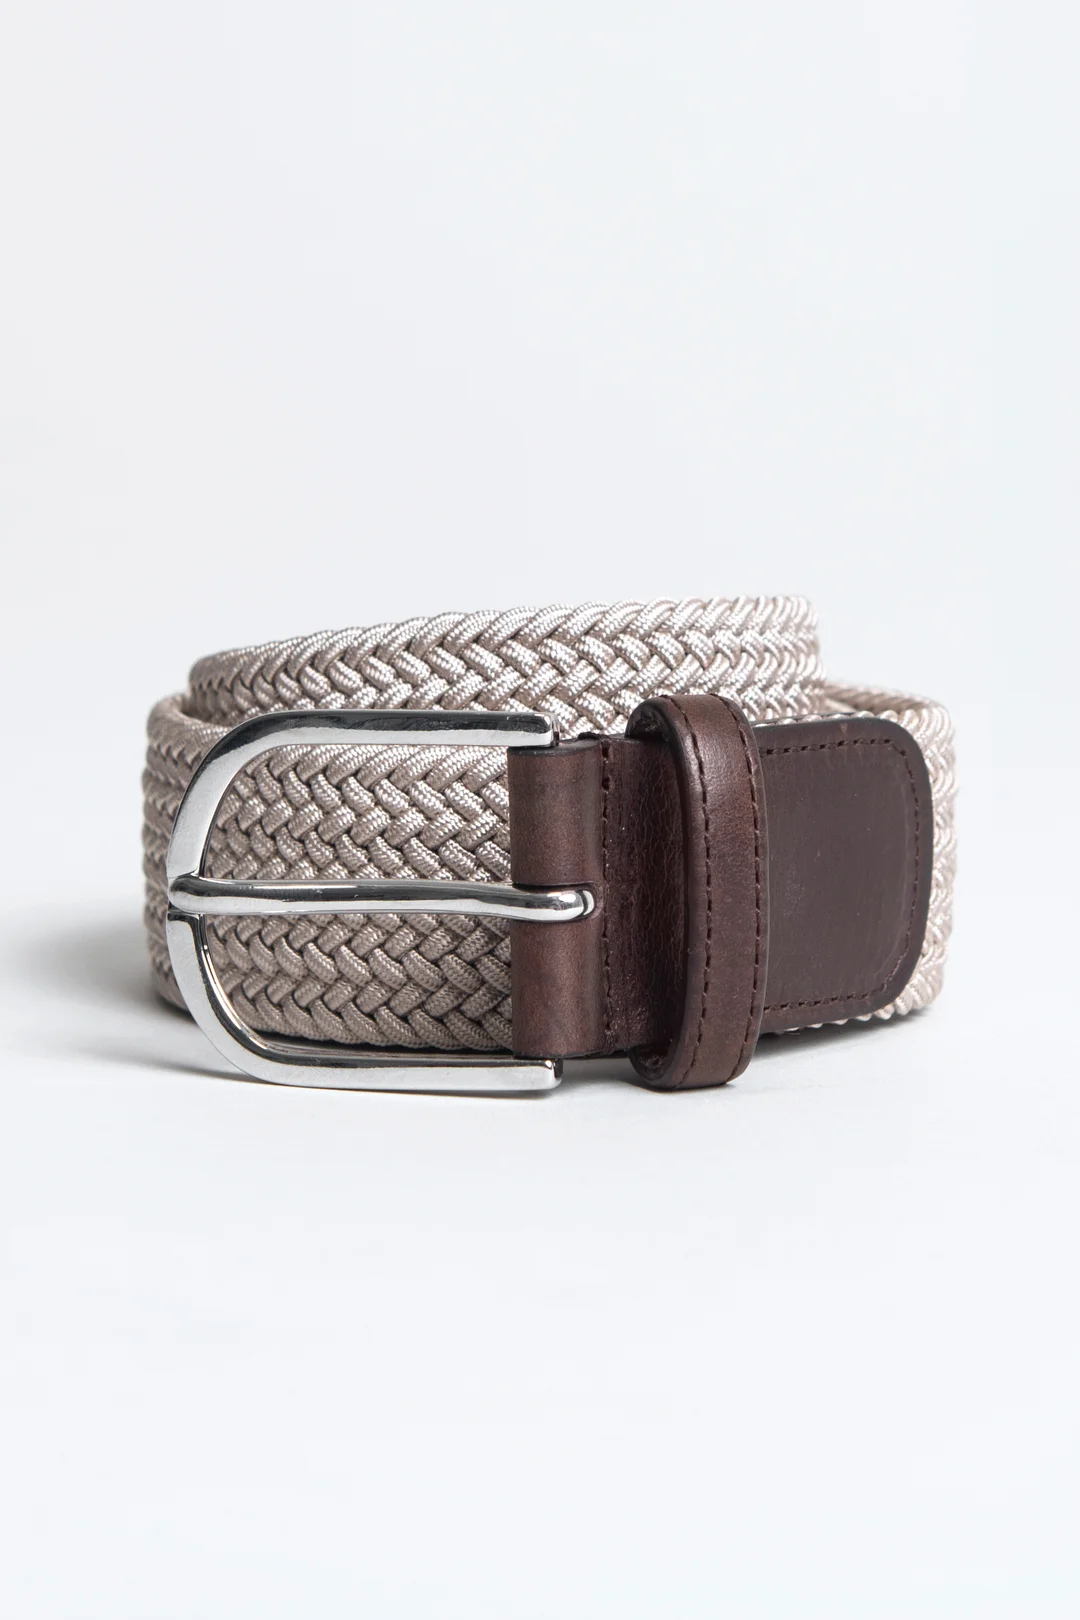 Buy Solid Beige with Brown Woven Braided Stretchable Belt - the